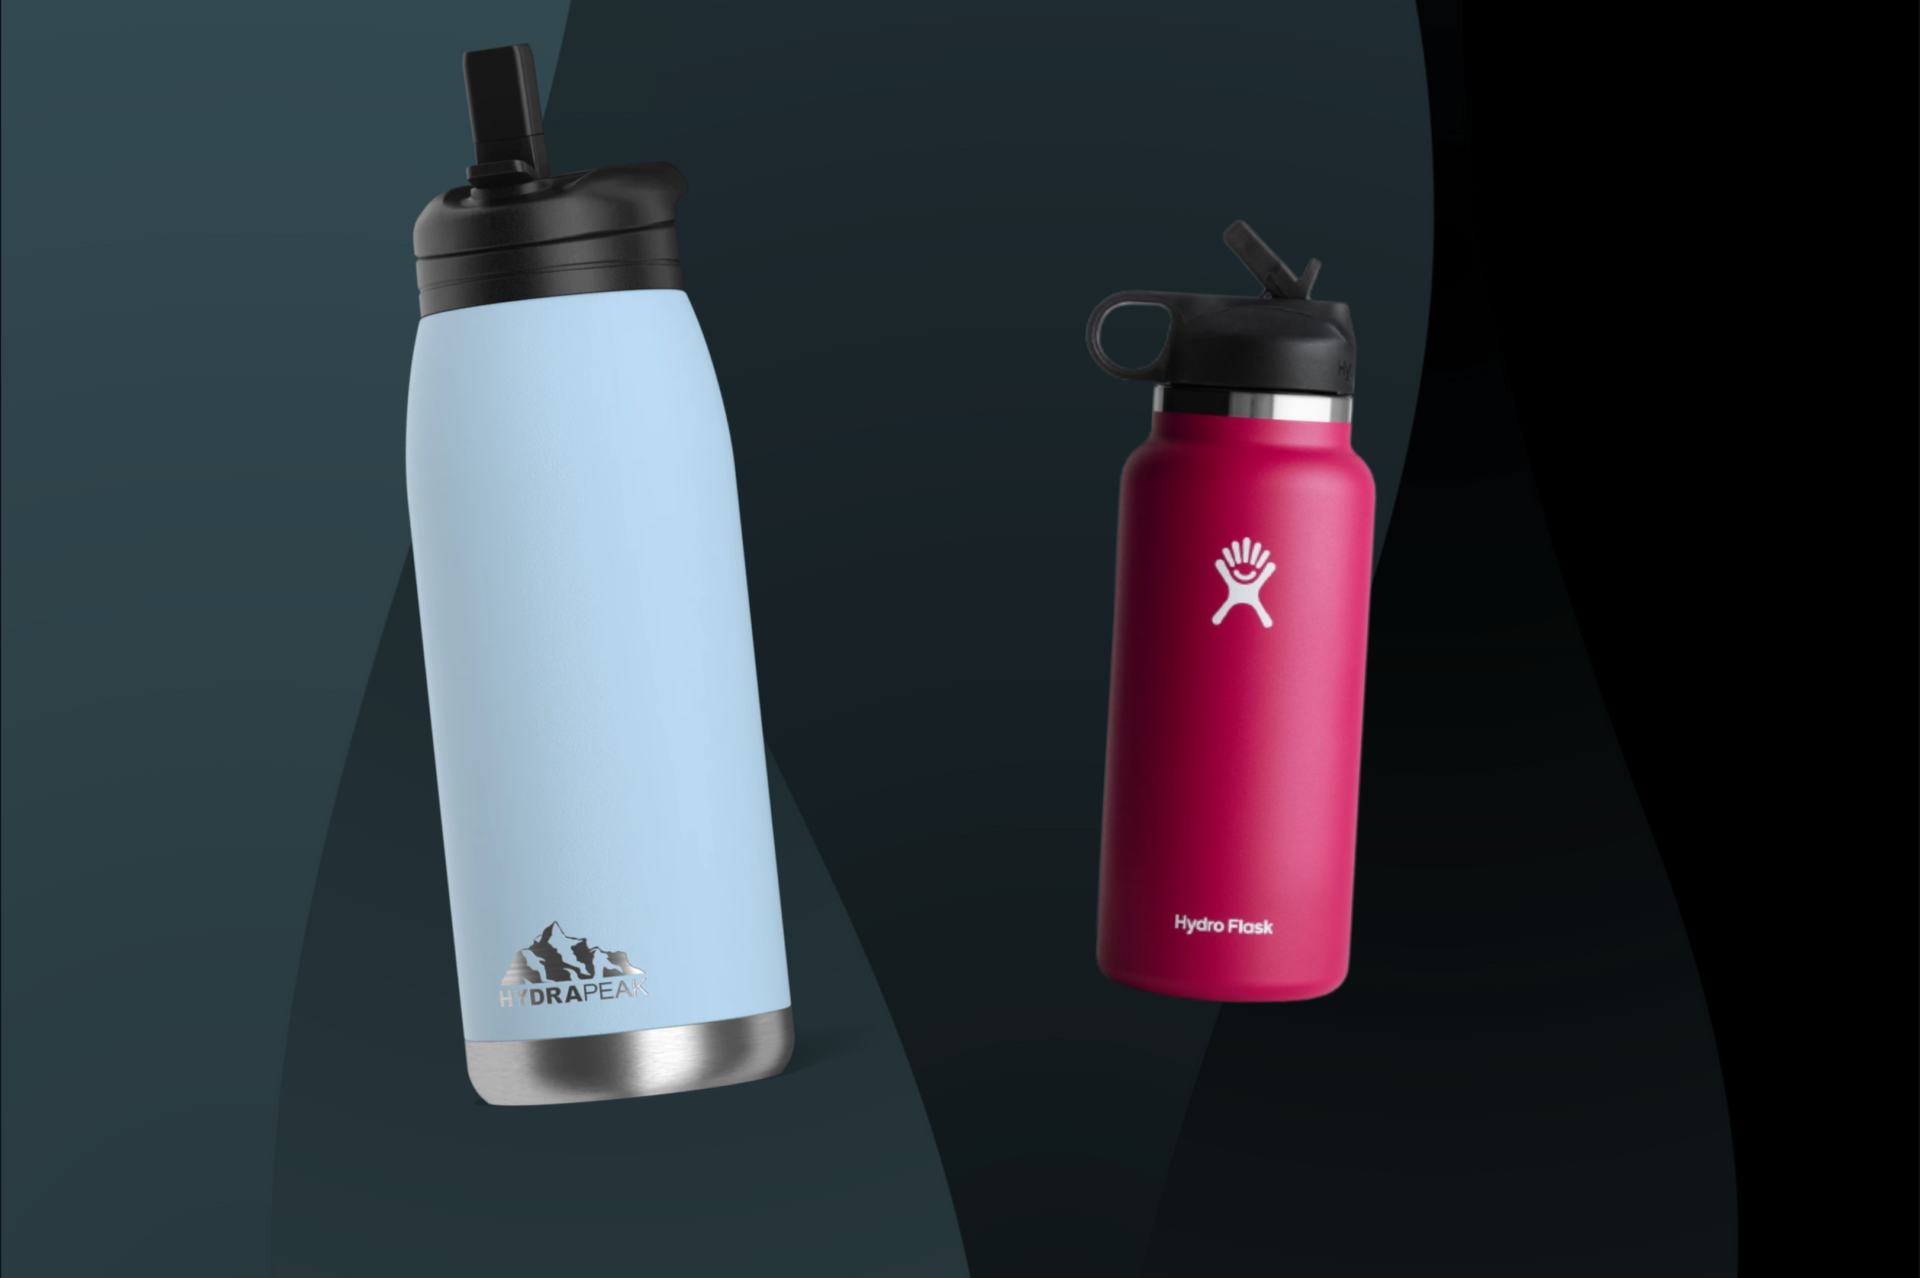 Hydropeak next to Hydro Flask, both with straw top